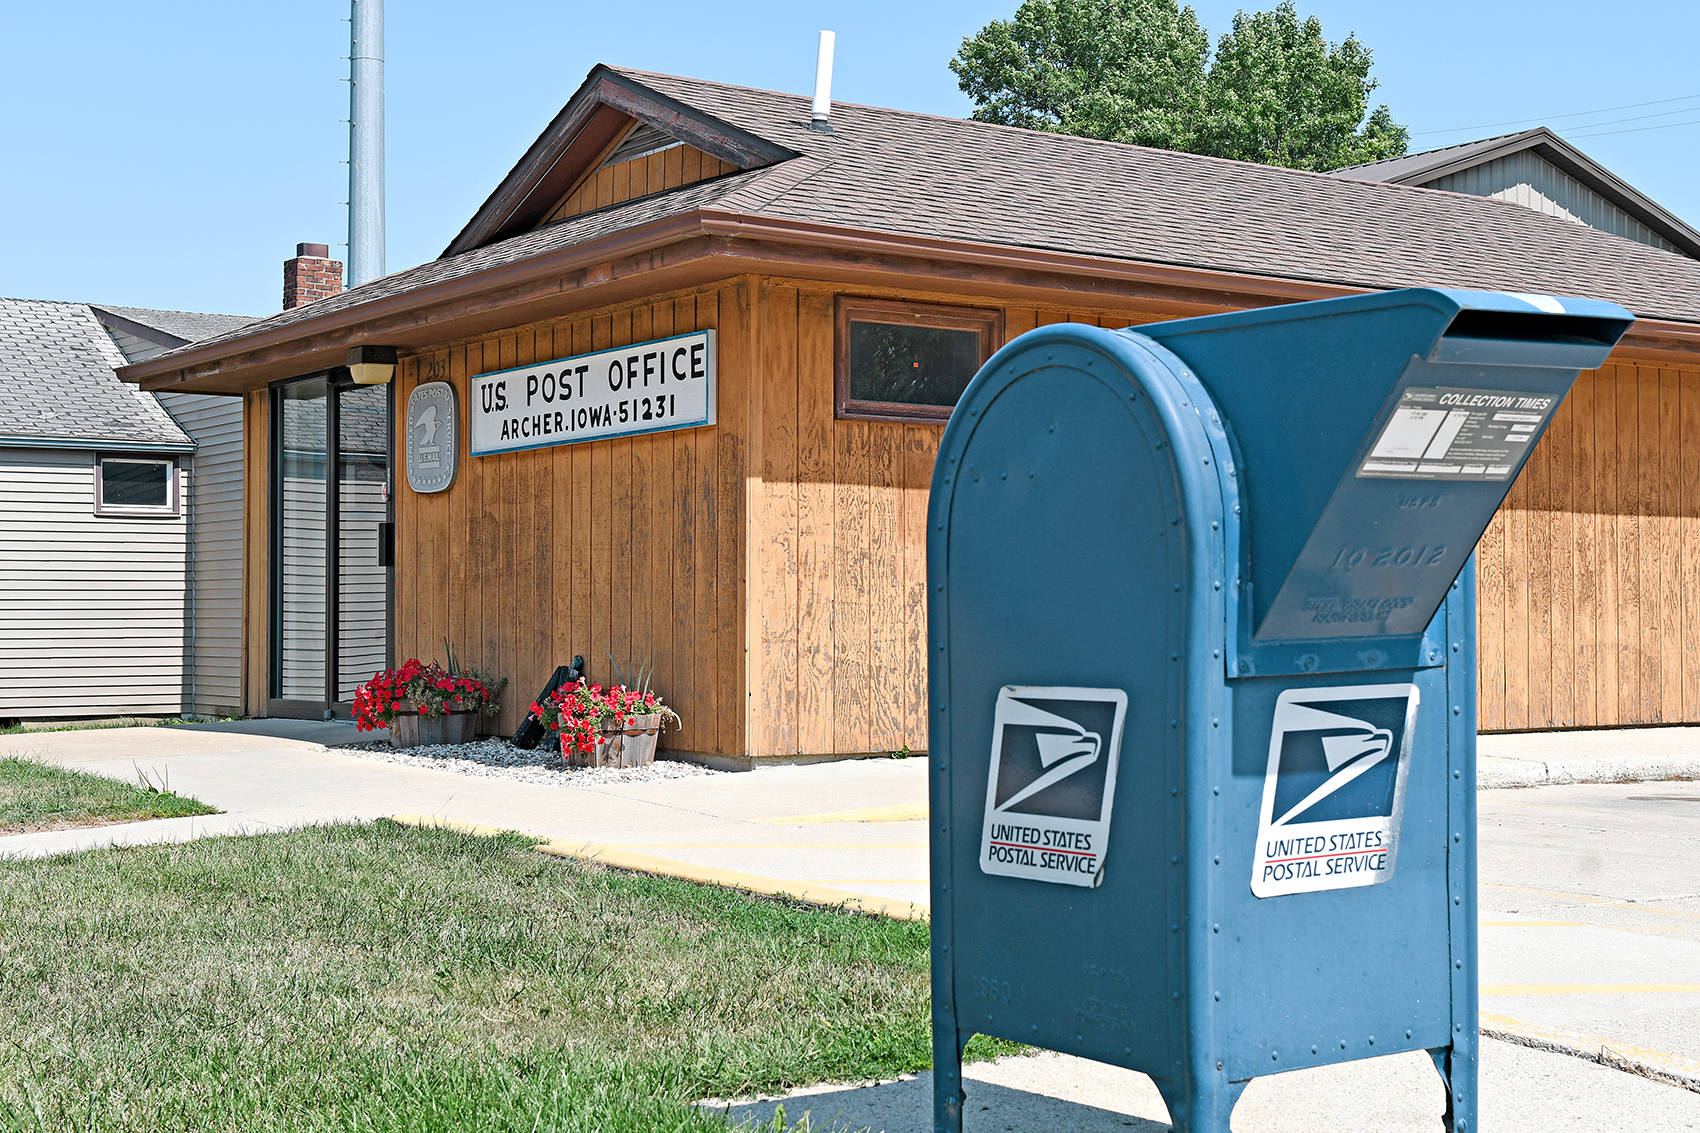 U.s Post Office At Archer Town